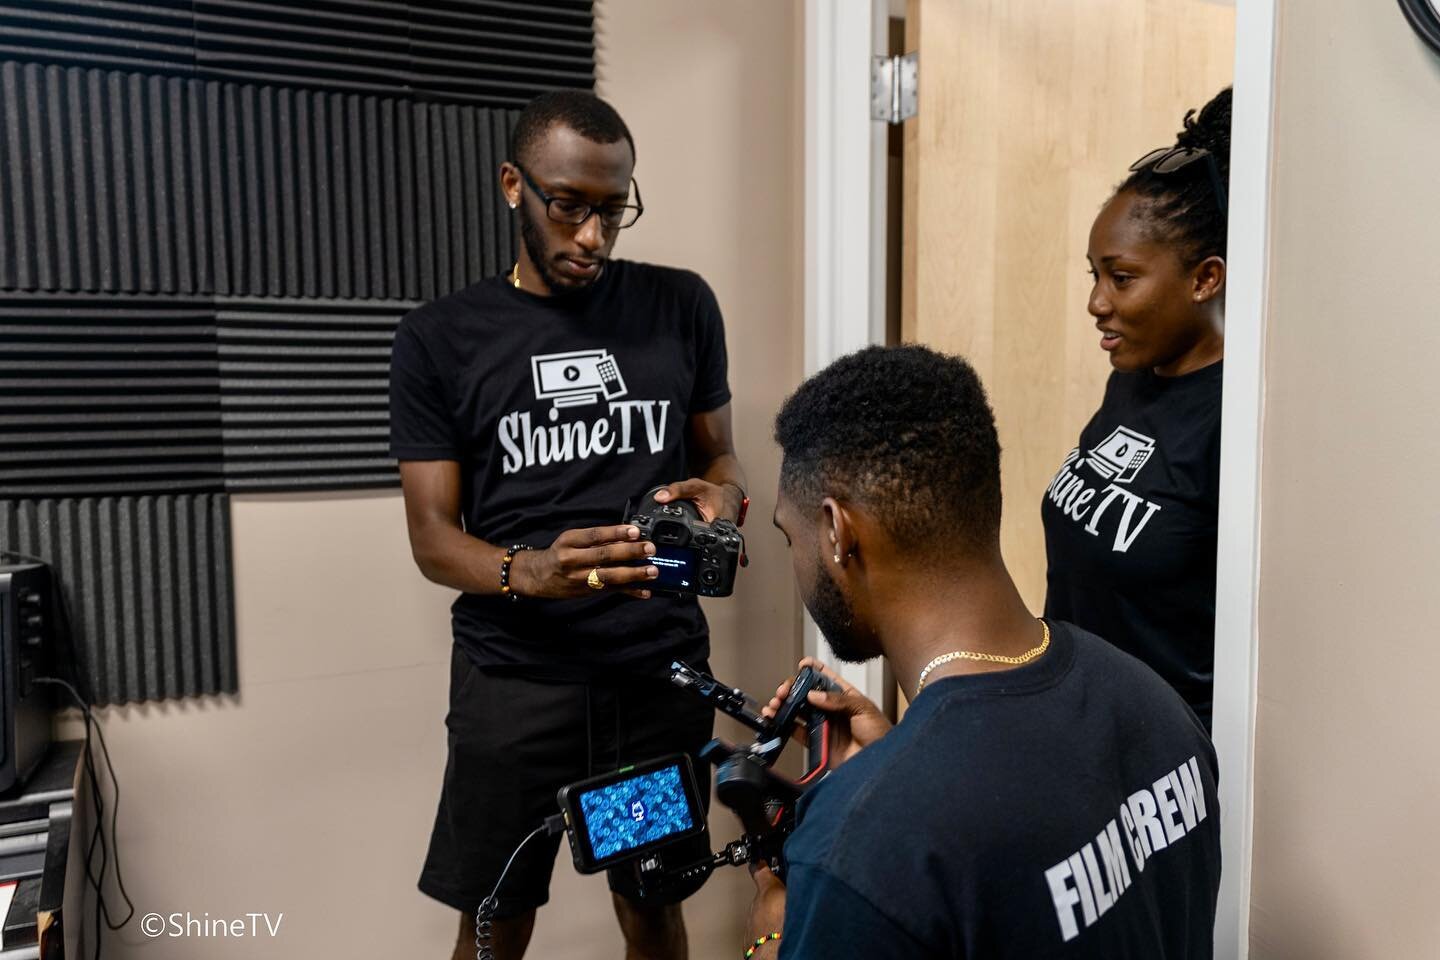 Behind the Scenes photo dump from the making of our latest commercial with  @prime_time_pbc. 

&bull;
Photos by @osm_pheddyj 🔥

&bull;
 #BehindTheScenes #CommercialShoot #CorporateVideo #LightsCameraAction #ShineTV #fortlauderdaleproductioncompany #